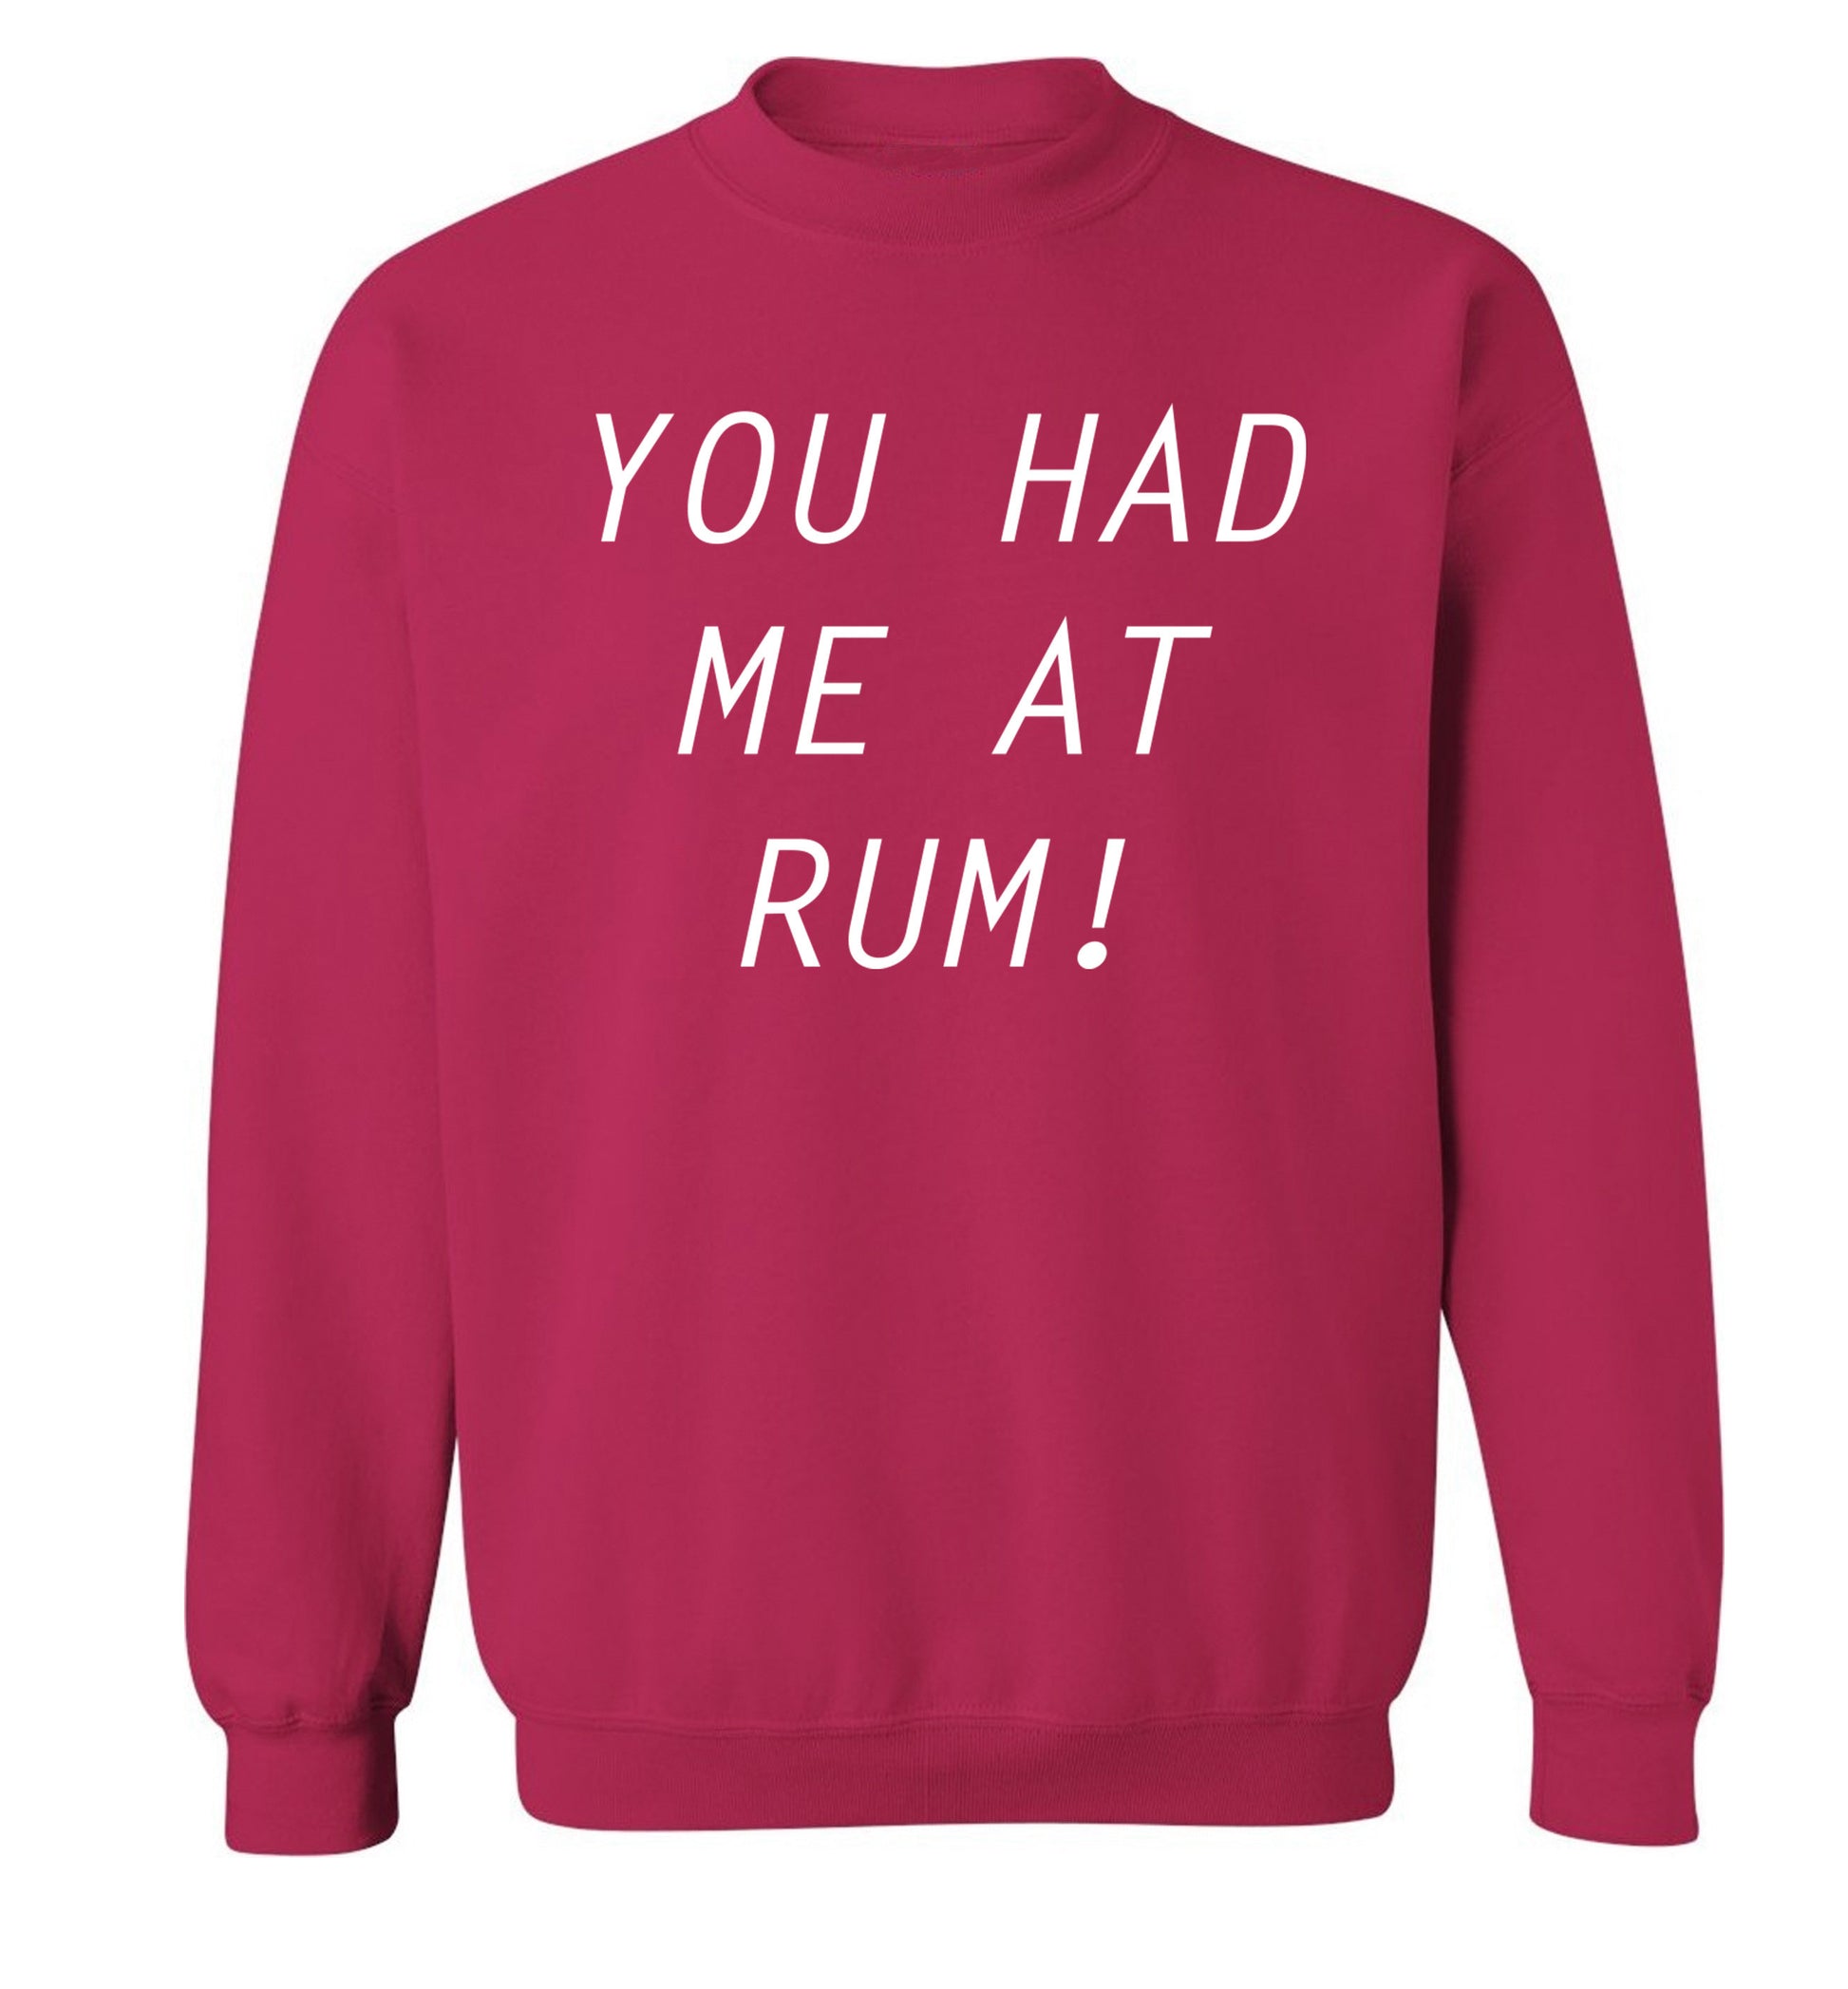 You had me at rum Adult's unisex pink Sweater 2XL